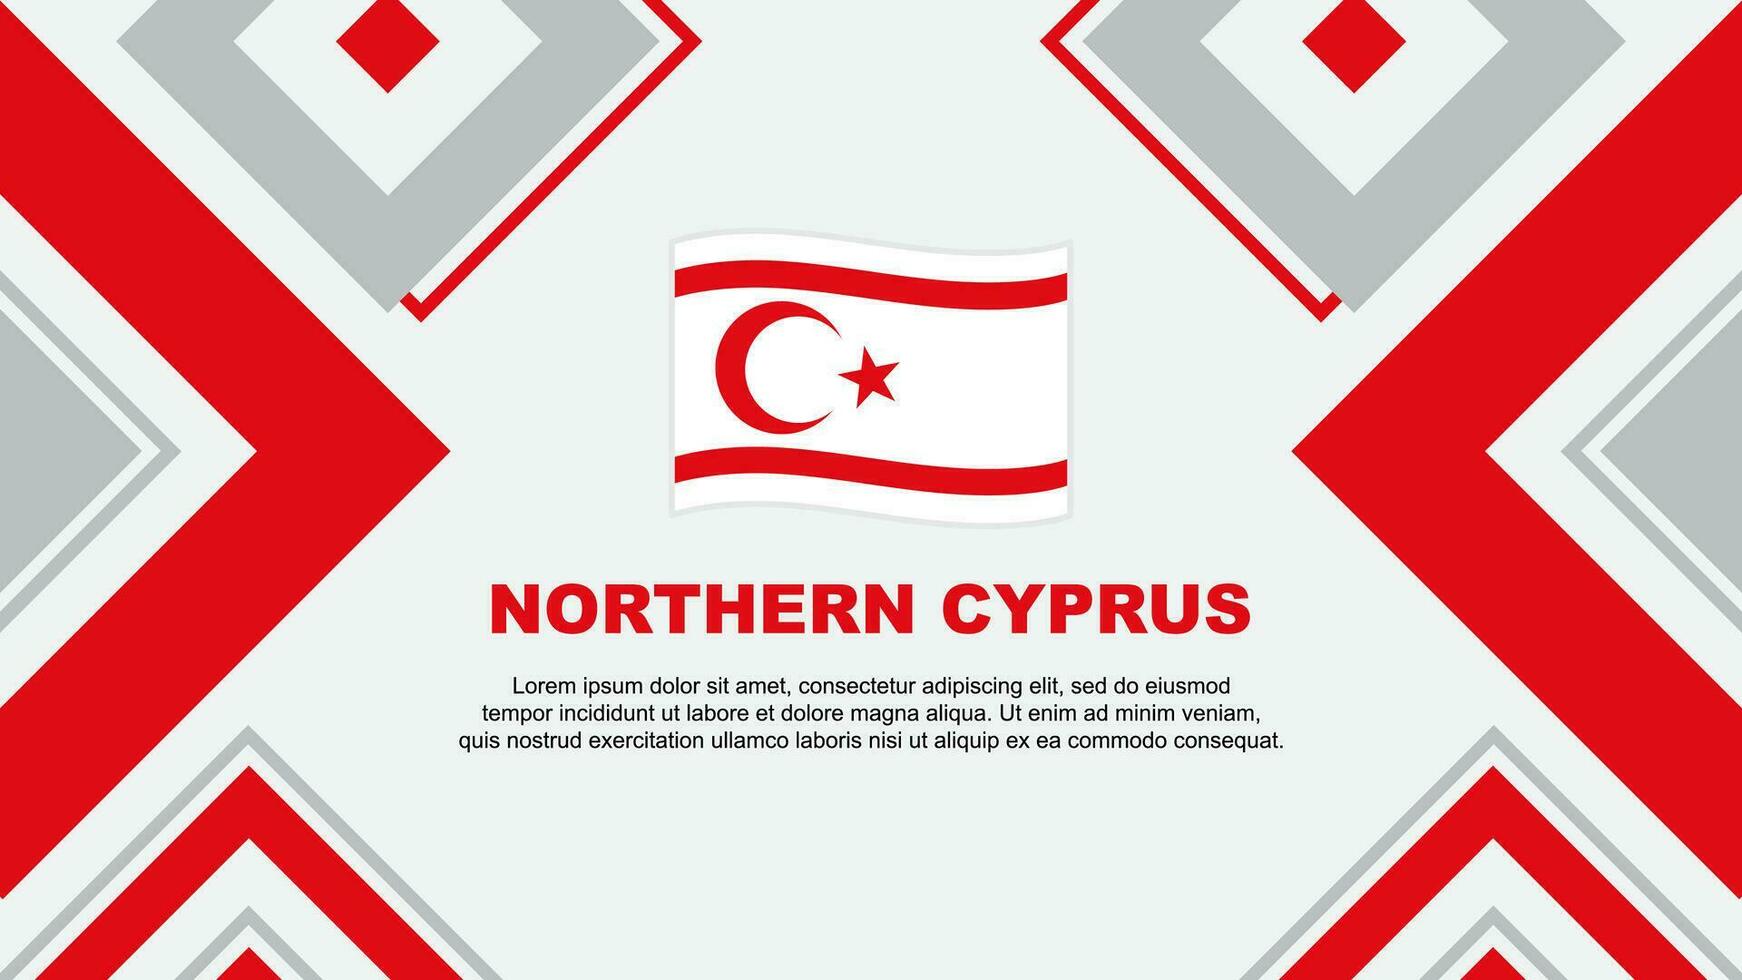 Northern Cyprus Flag Abstract Background Design Template. Northern Cyprus Independence Day Banner Wallpaper Vector Illustration. Northern Cyprus Independence Day